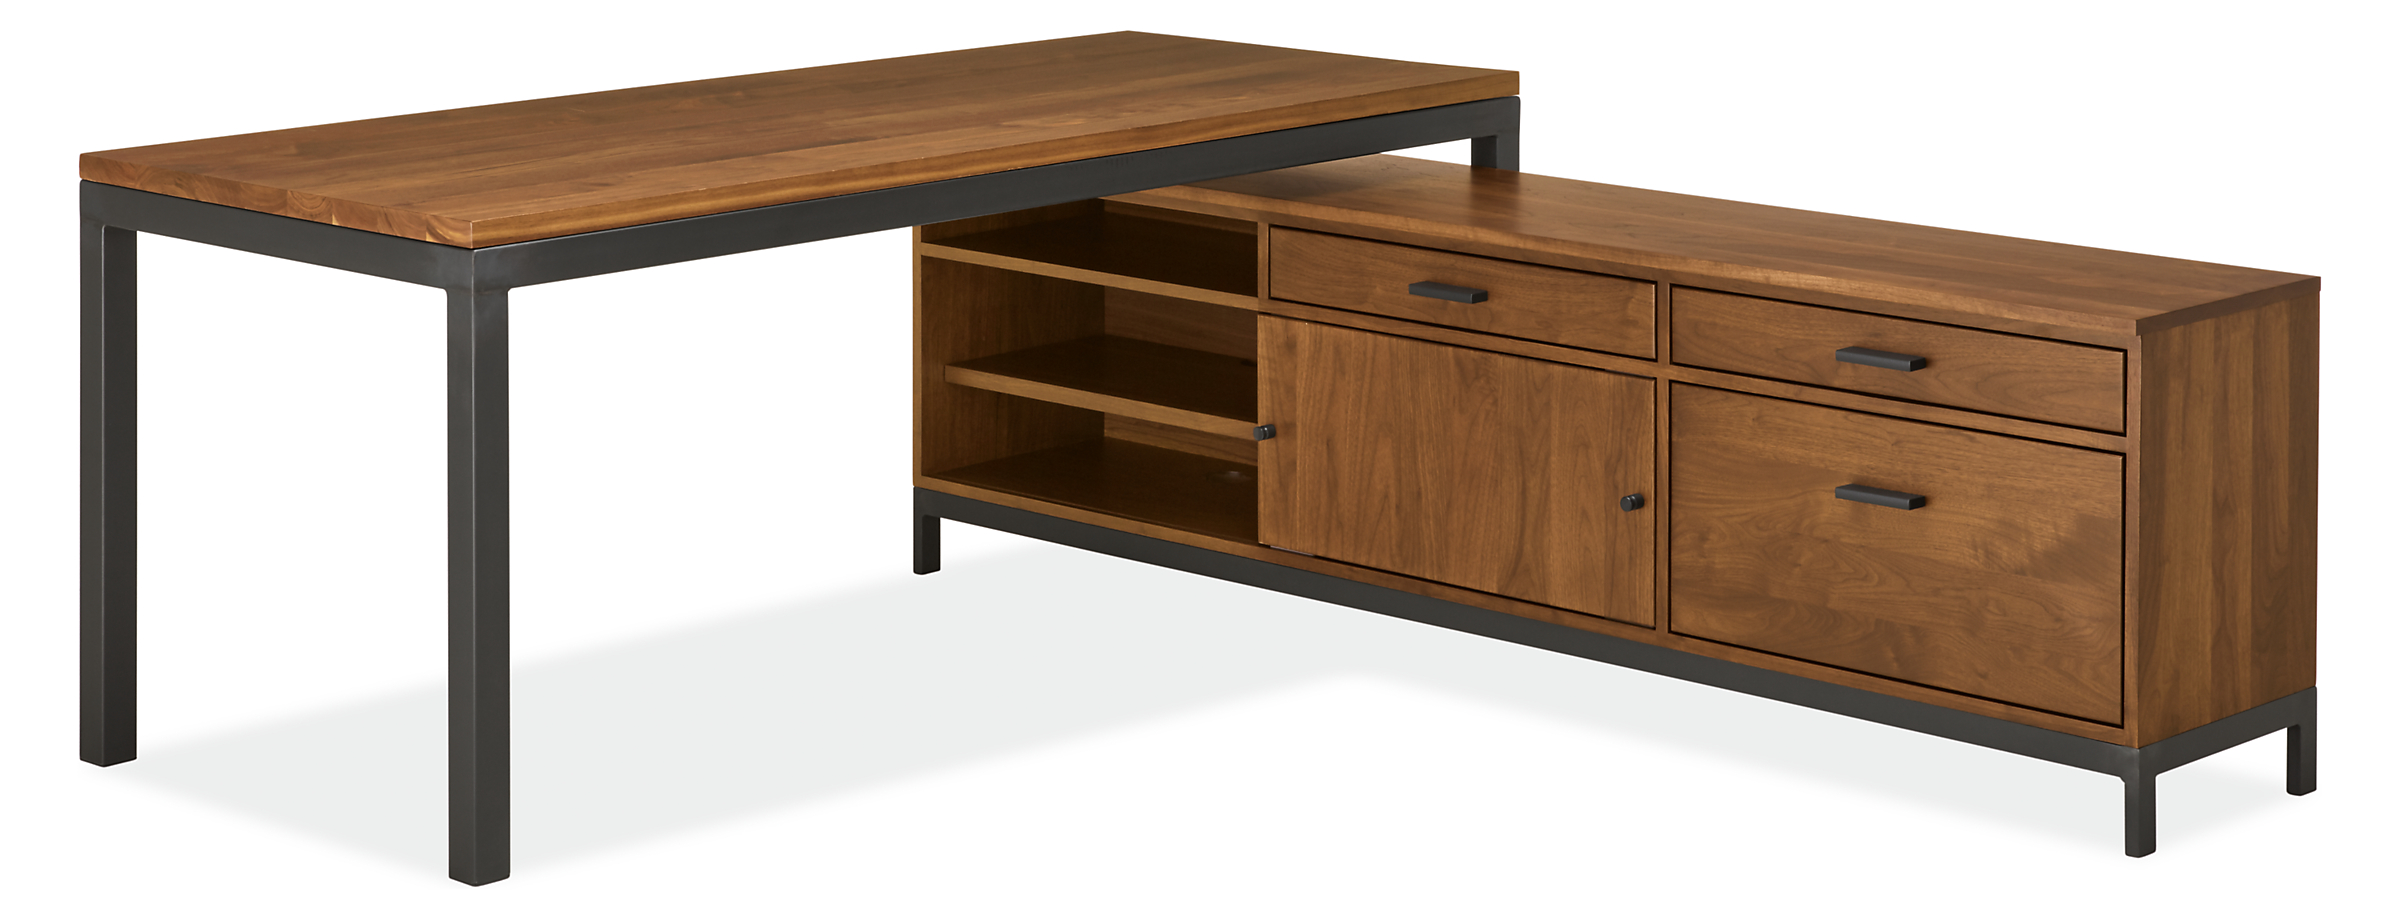 Combination of Linear right-file drawer bench underneath Parsons desk in L-shaped configuration.